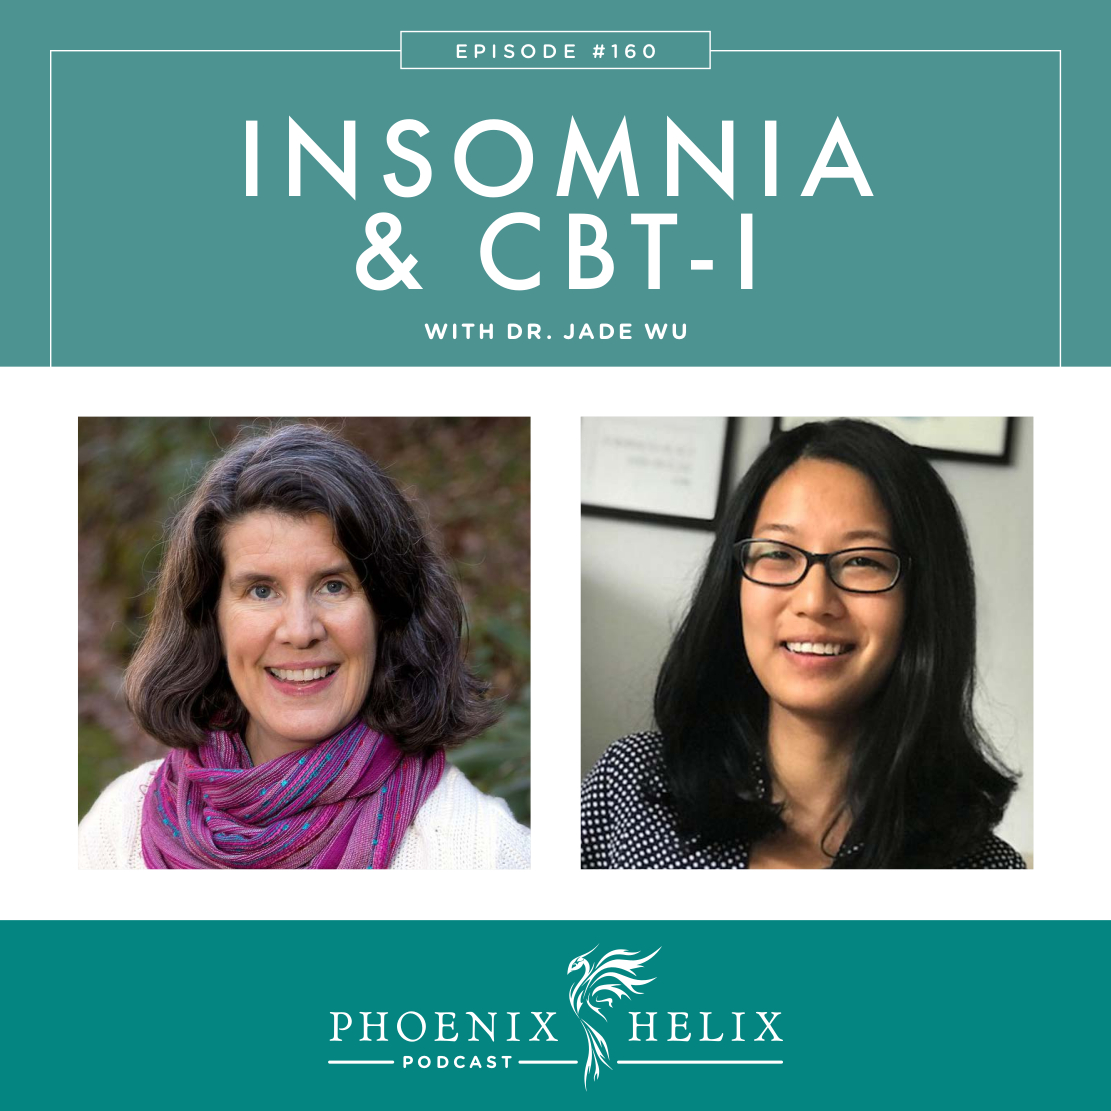 Insomnia & CBT-I with Dr. Jade Wu | Phoenix Helix Podcast